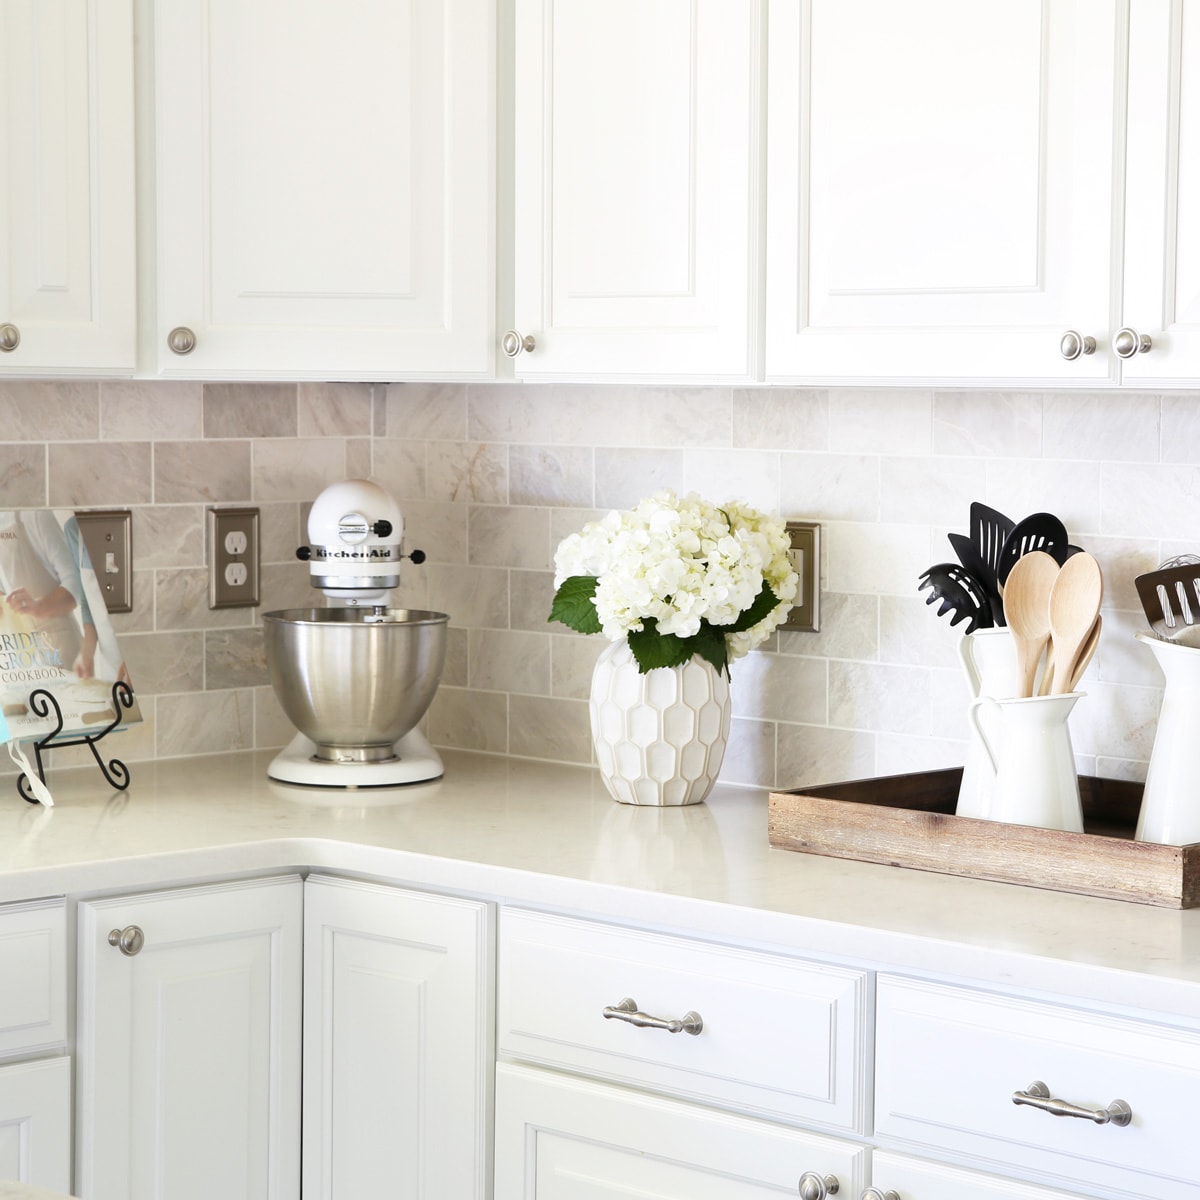 How to clean white quartz countertops – an expert guide for good-as-new results